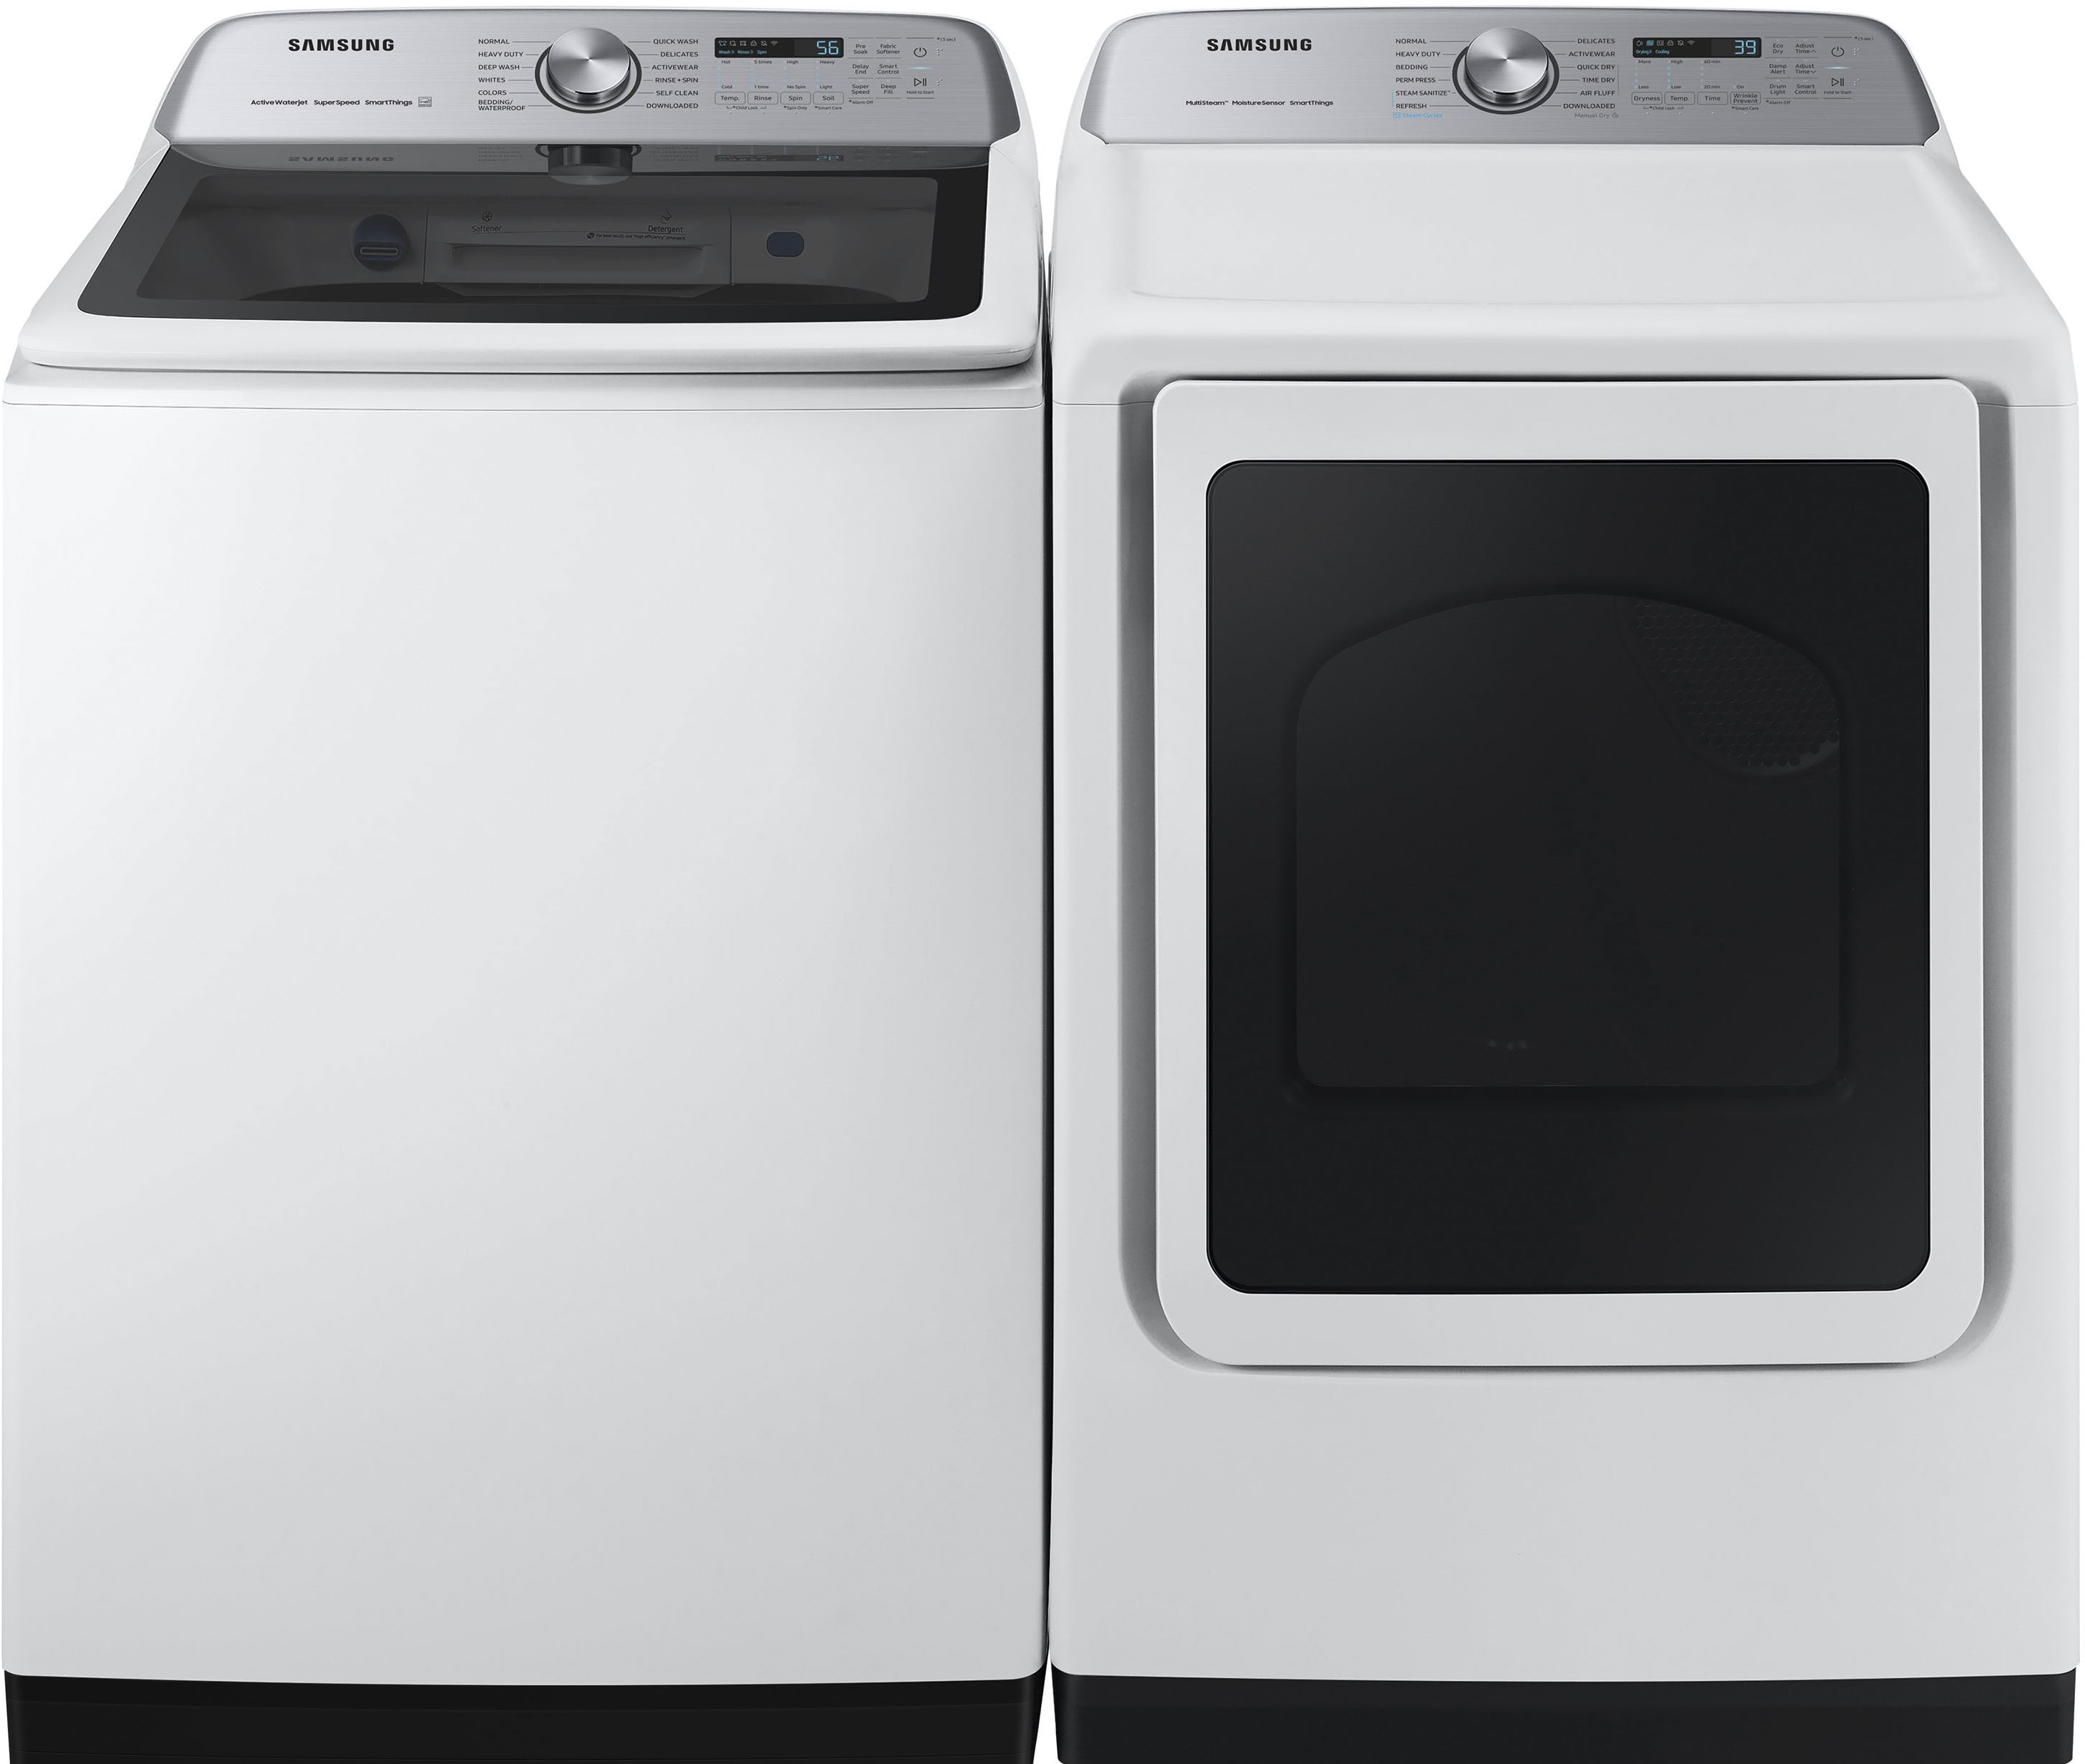 Samsung - 5.2 cu. ft. Large Capacity Smart Top Load Washer & Samsung - 7.4 Cu. Ft. Gas Dryer - White